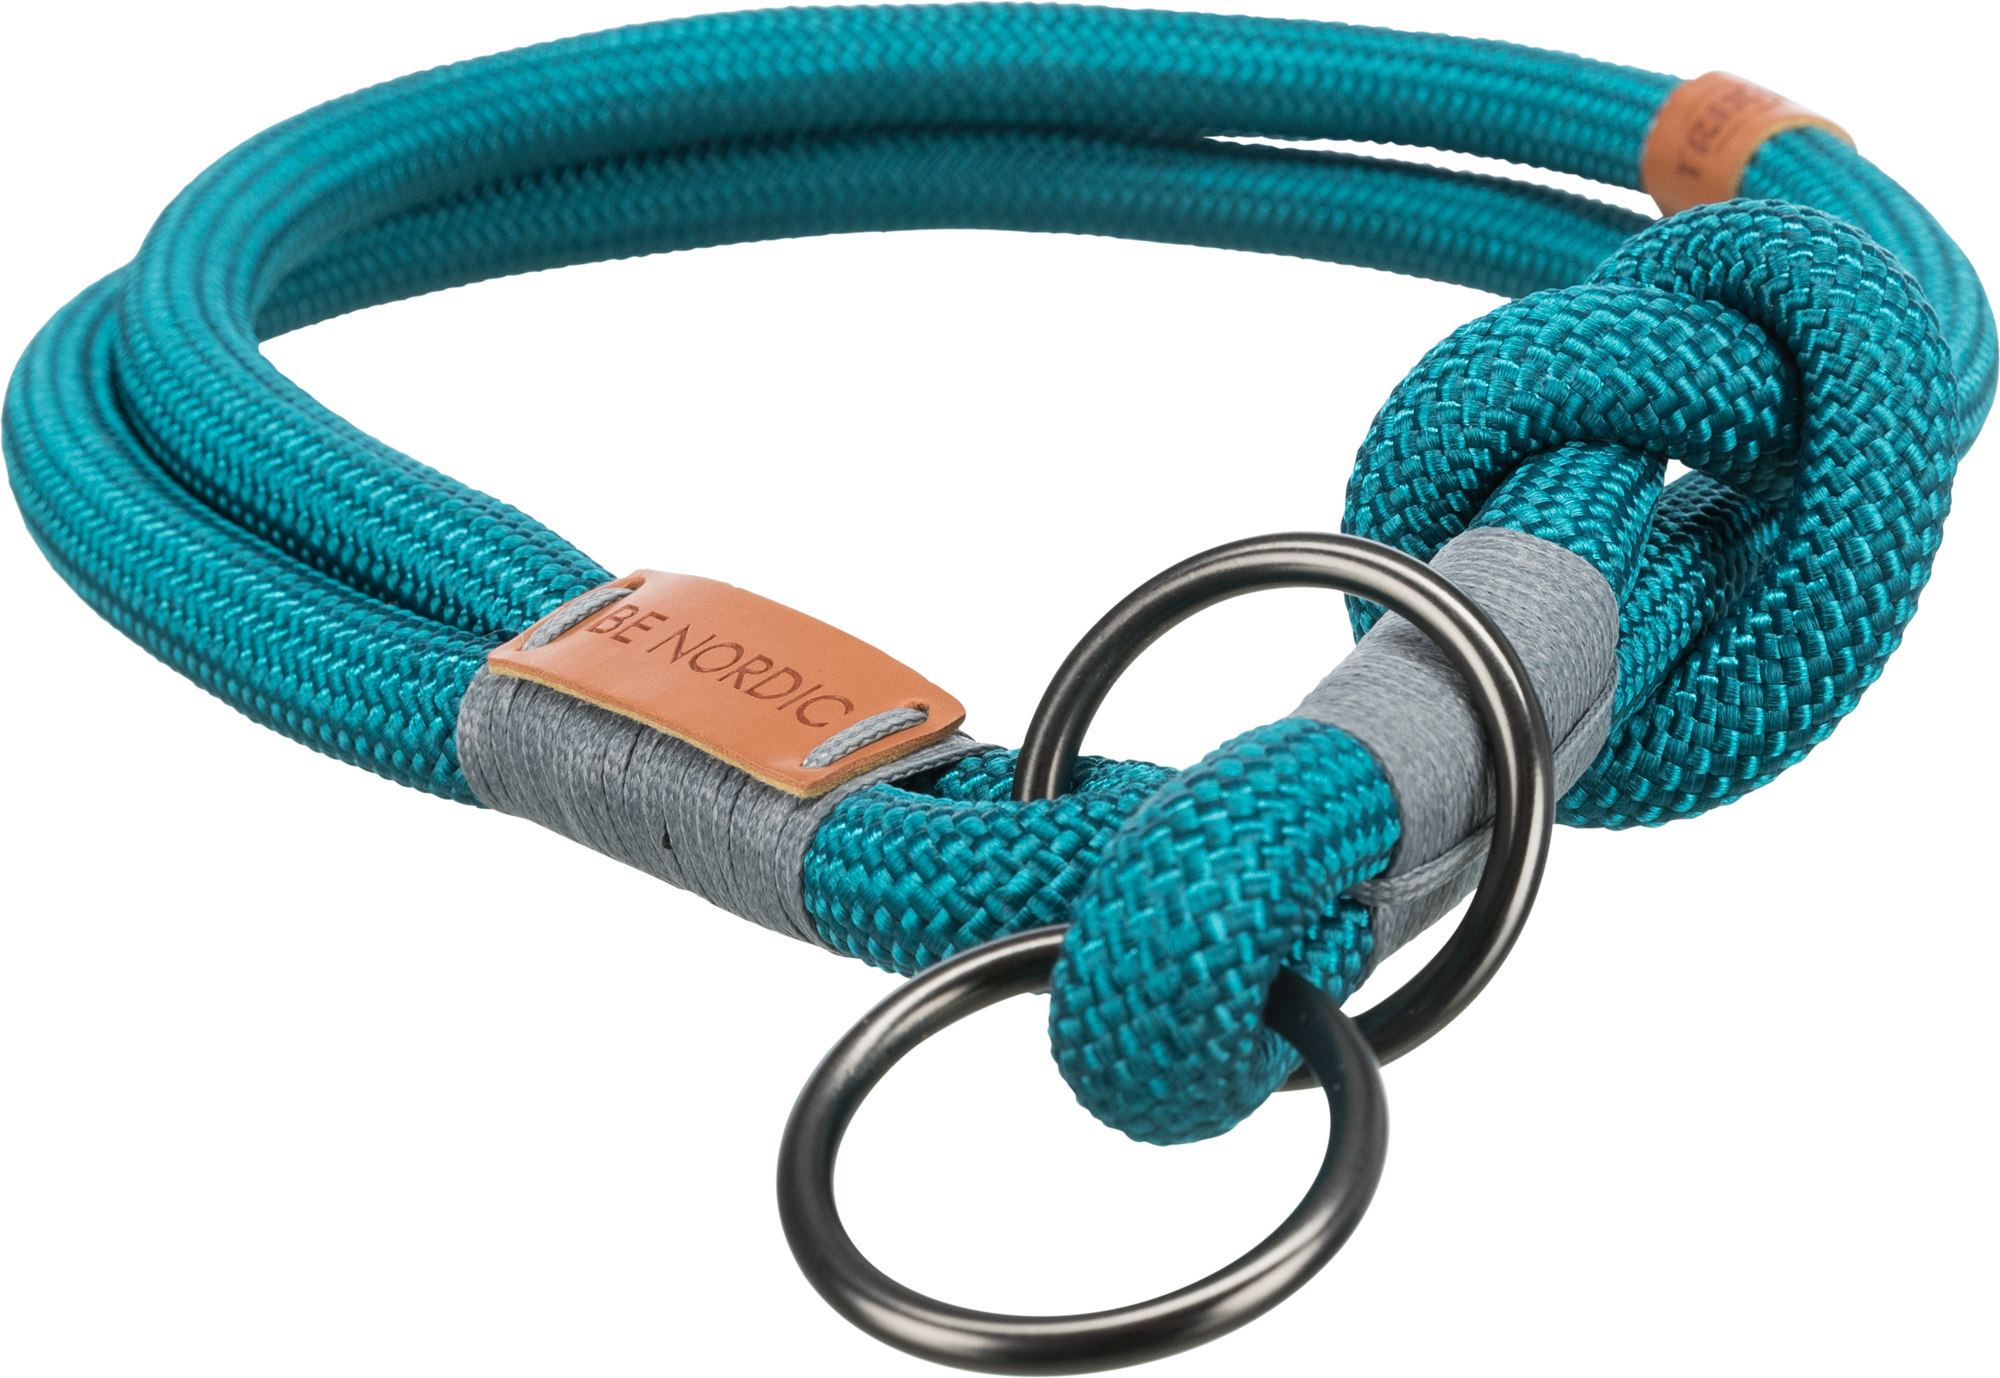 TRIXIE BE NORDIC Zug-Stopp-Halsband TRIXIE BE NORDIC Zug-Stopp-Halsband, XS–S: 30 cm/ø 6 mm, petrol/hellgrau